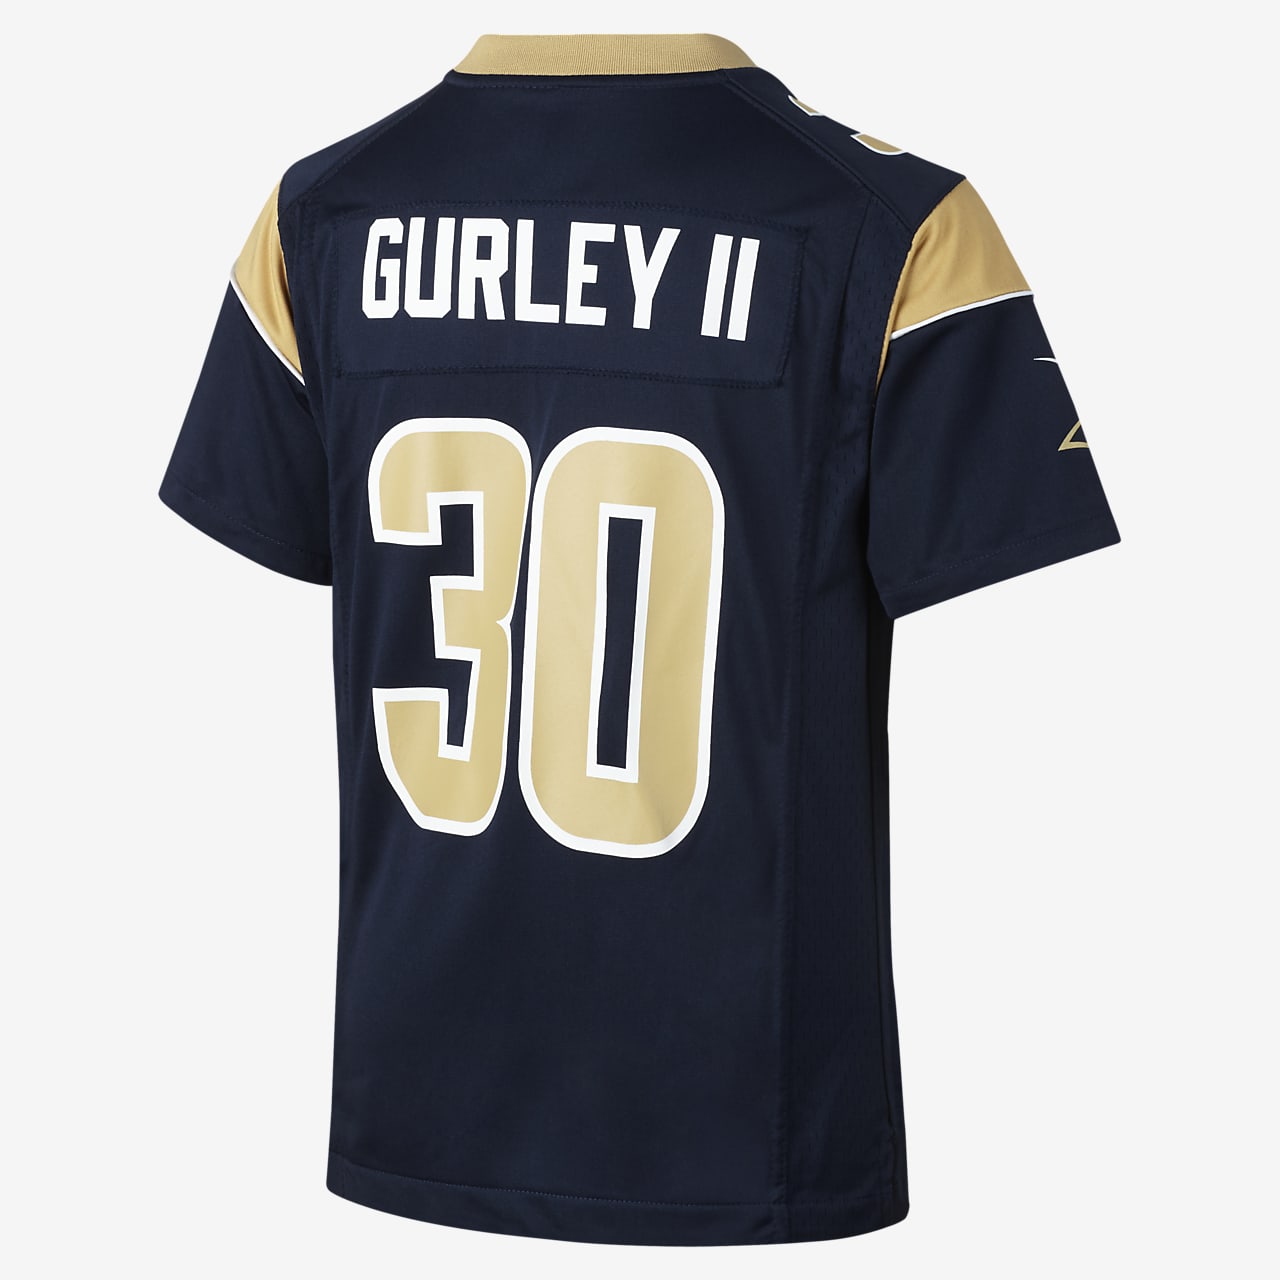 NFL Los Angeles Rams (Todd Gurley) Kids' Football Home Game Jersey